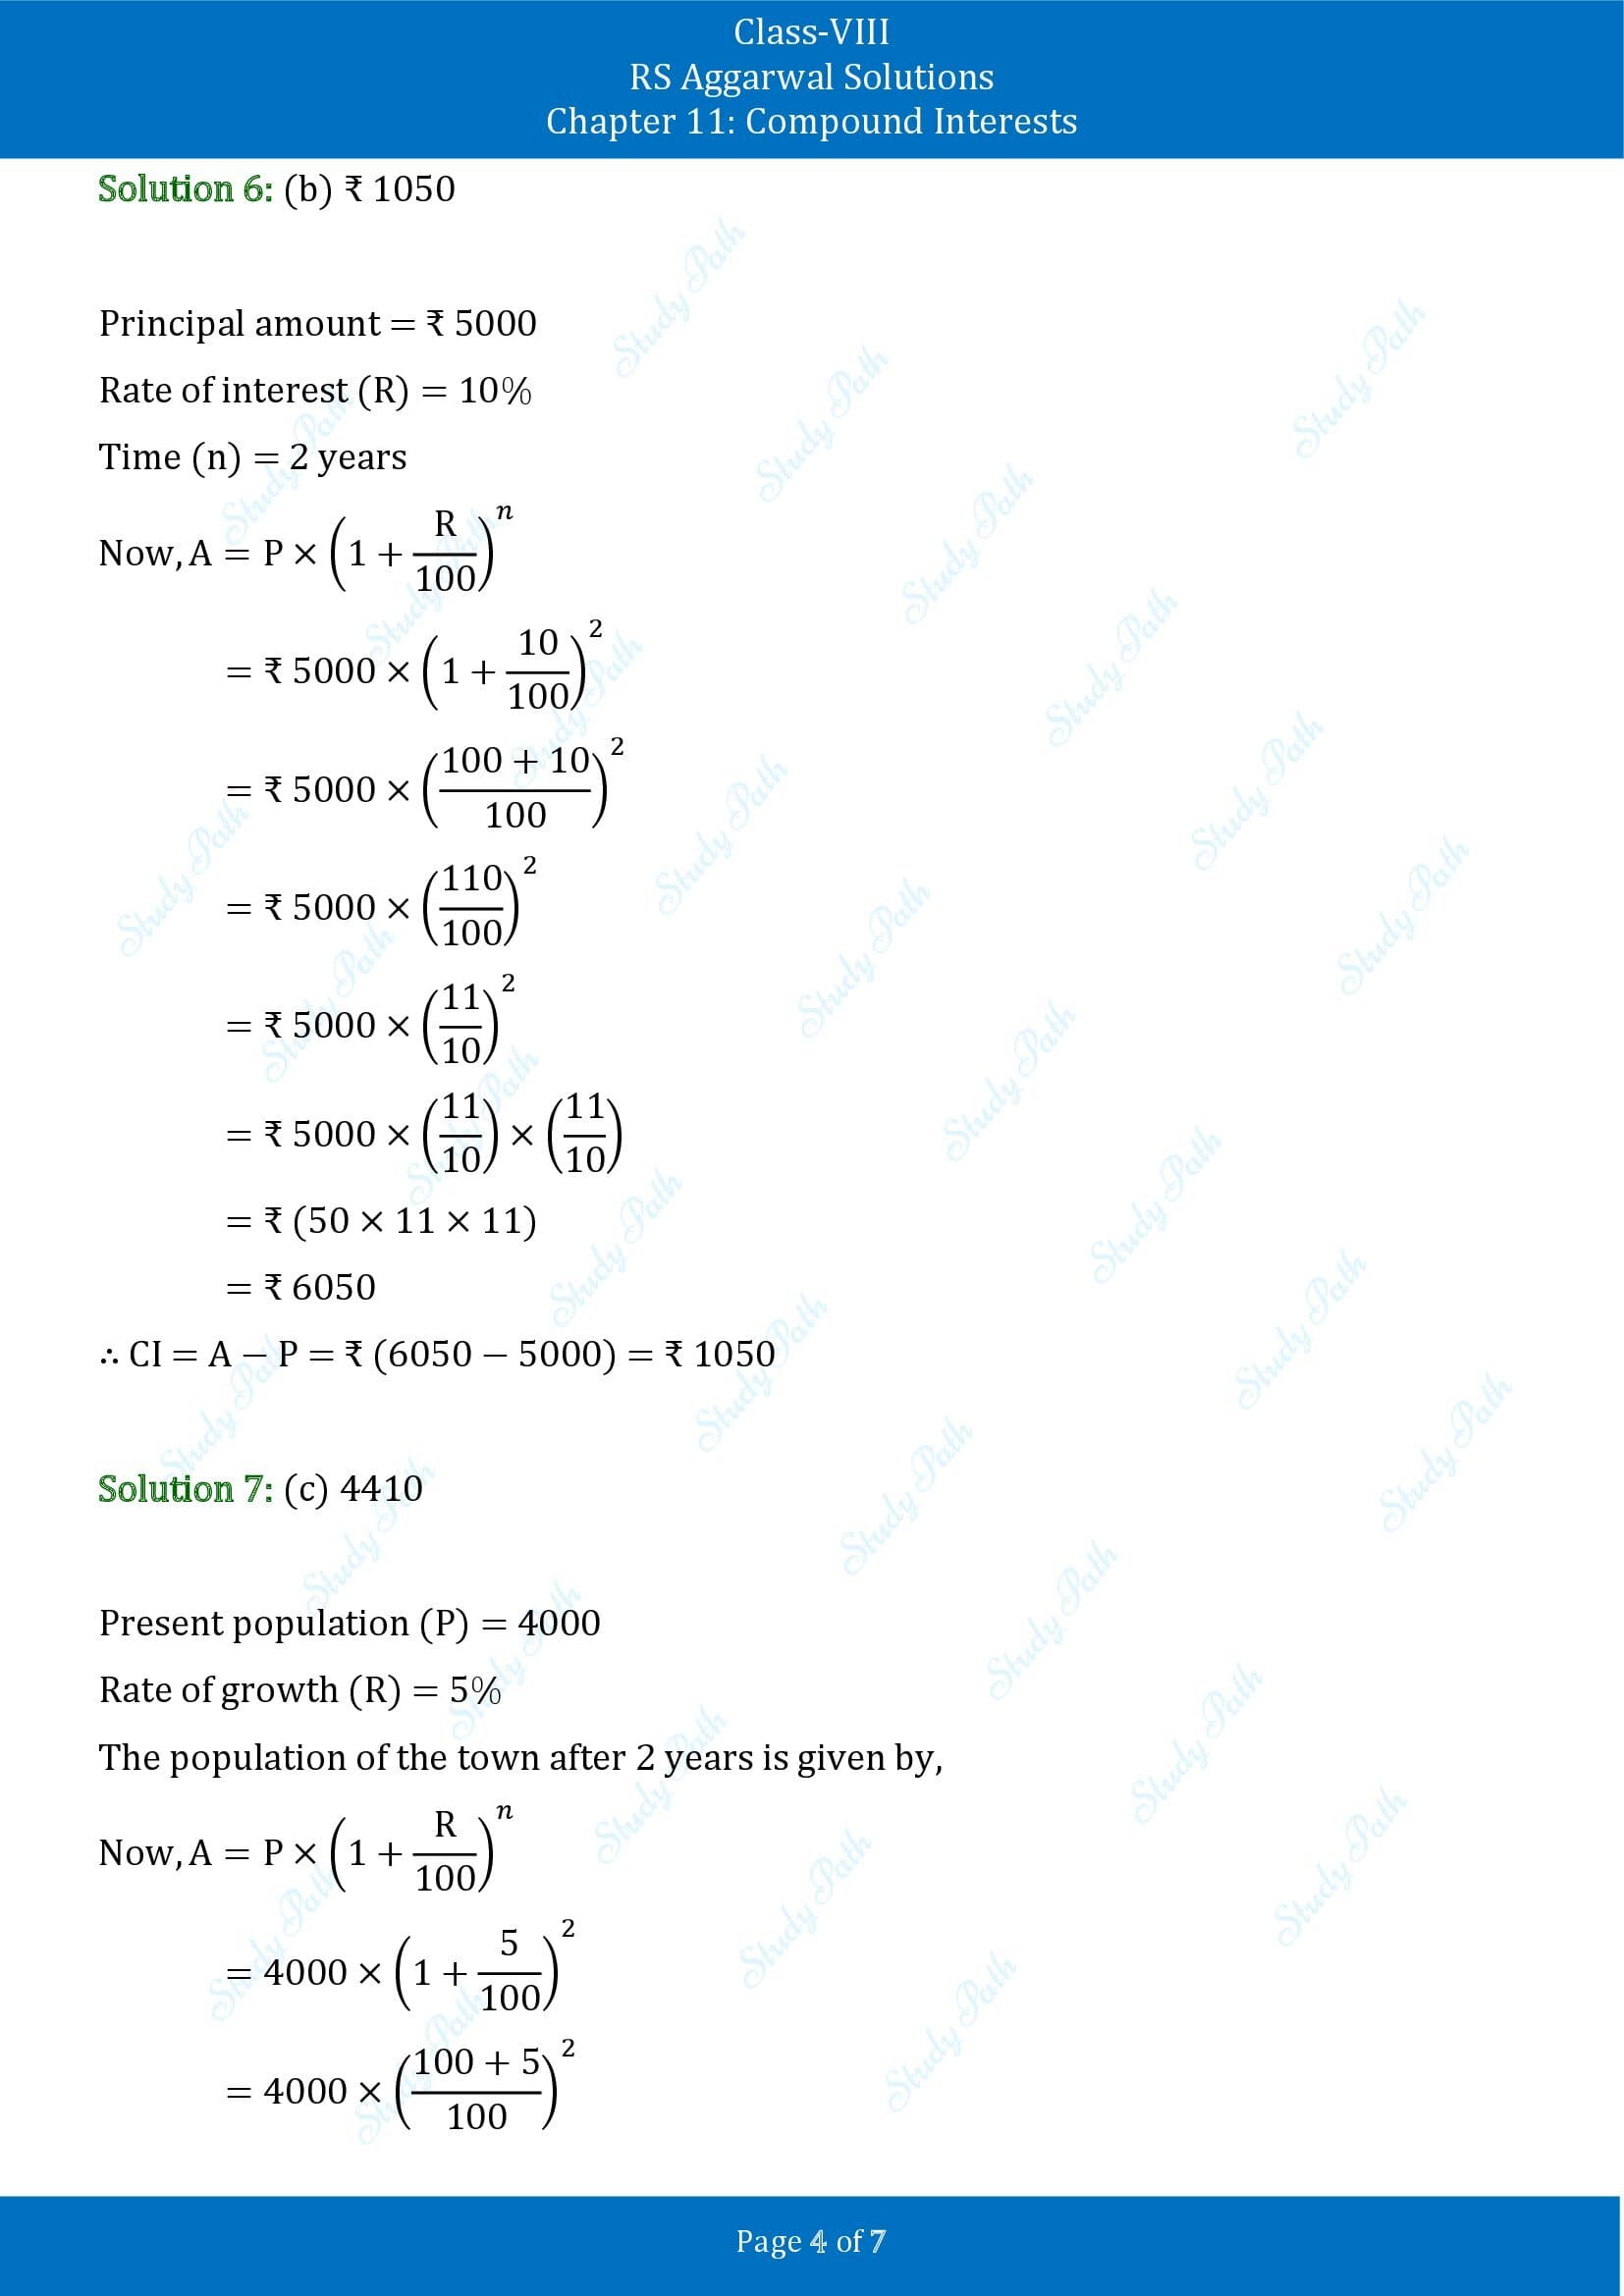 RS Aggarwal Solutions Class 8 Chapter 11 Compound Interests Test Paper 00004